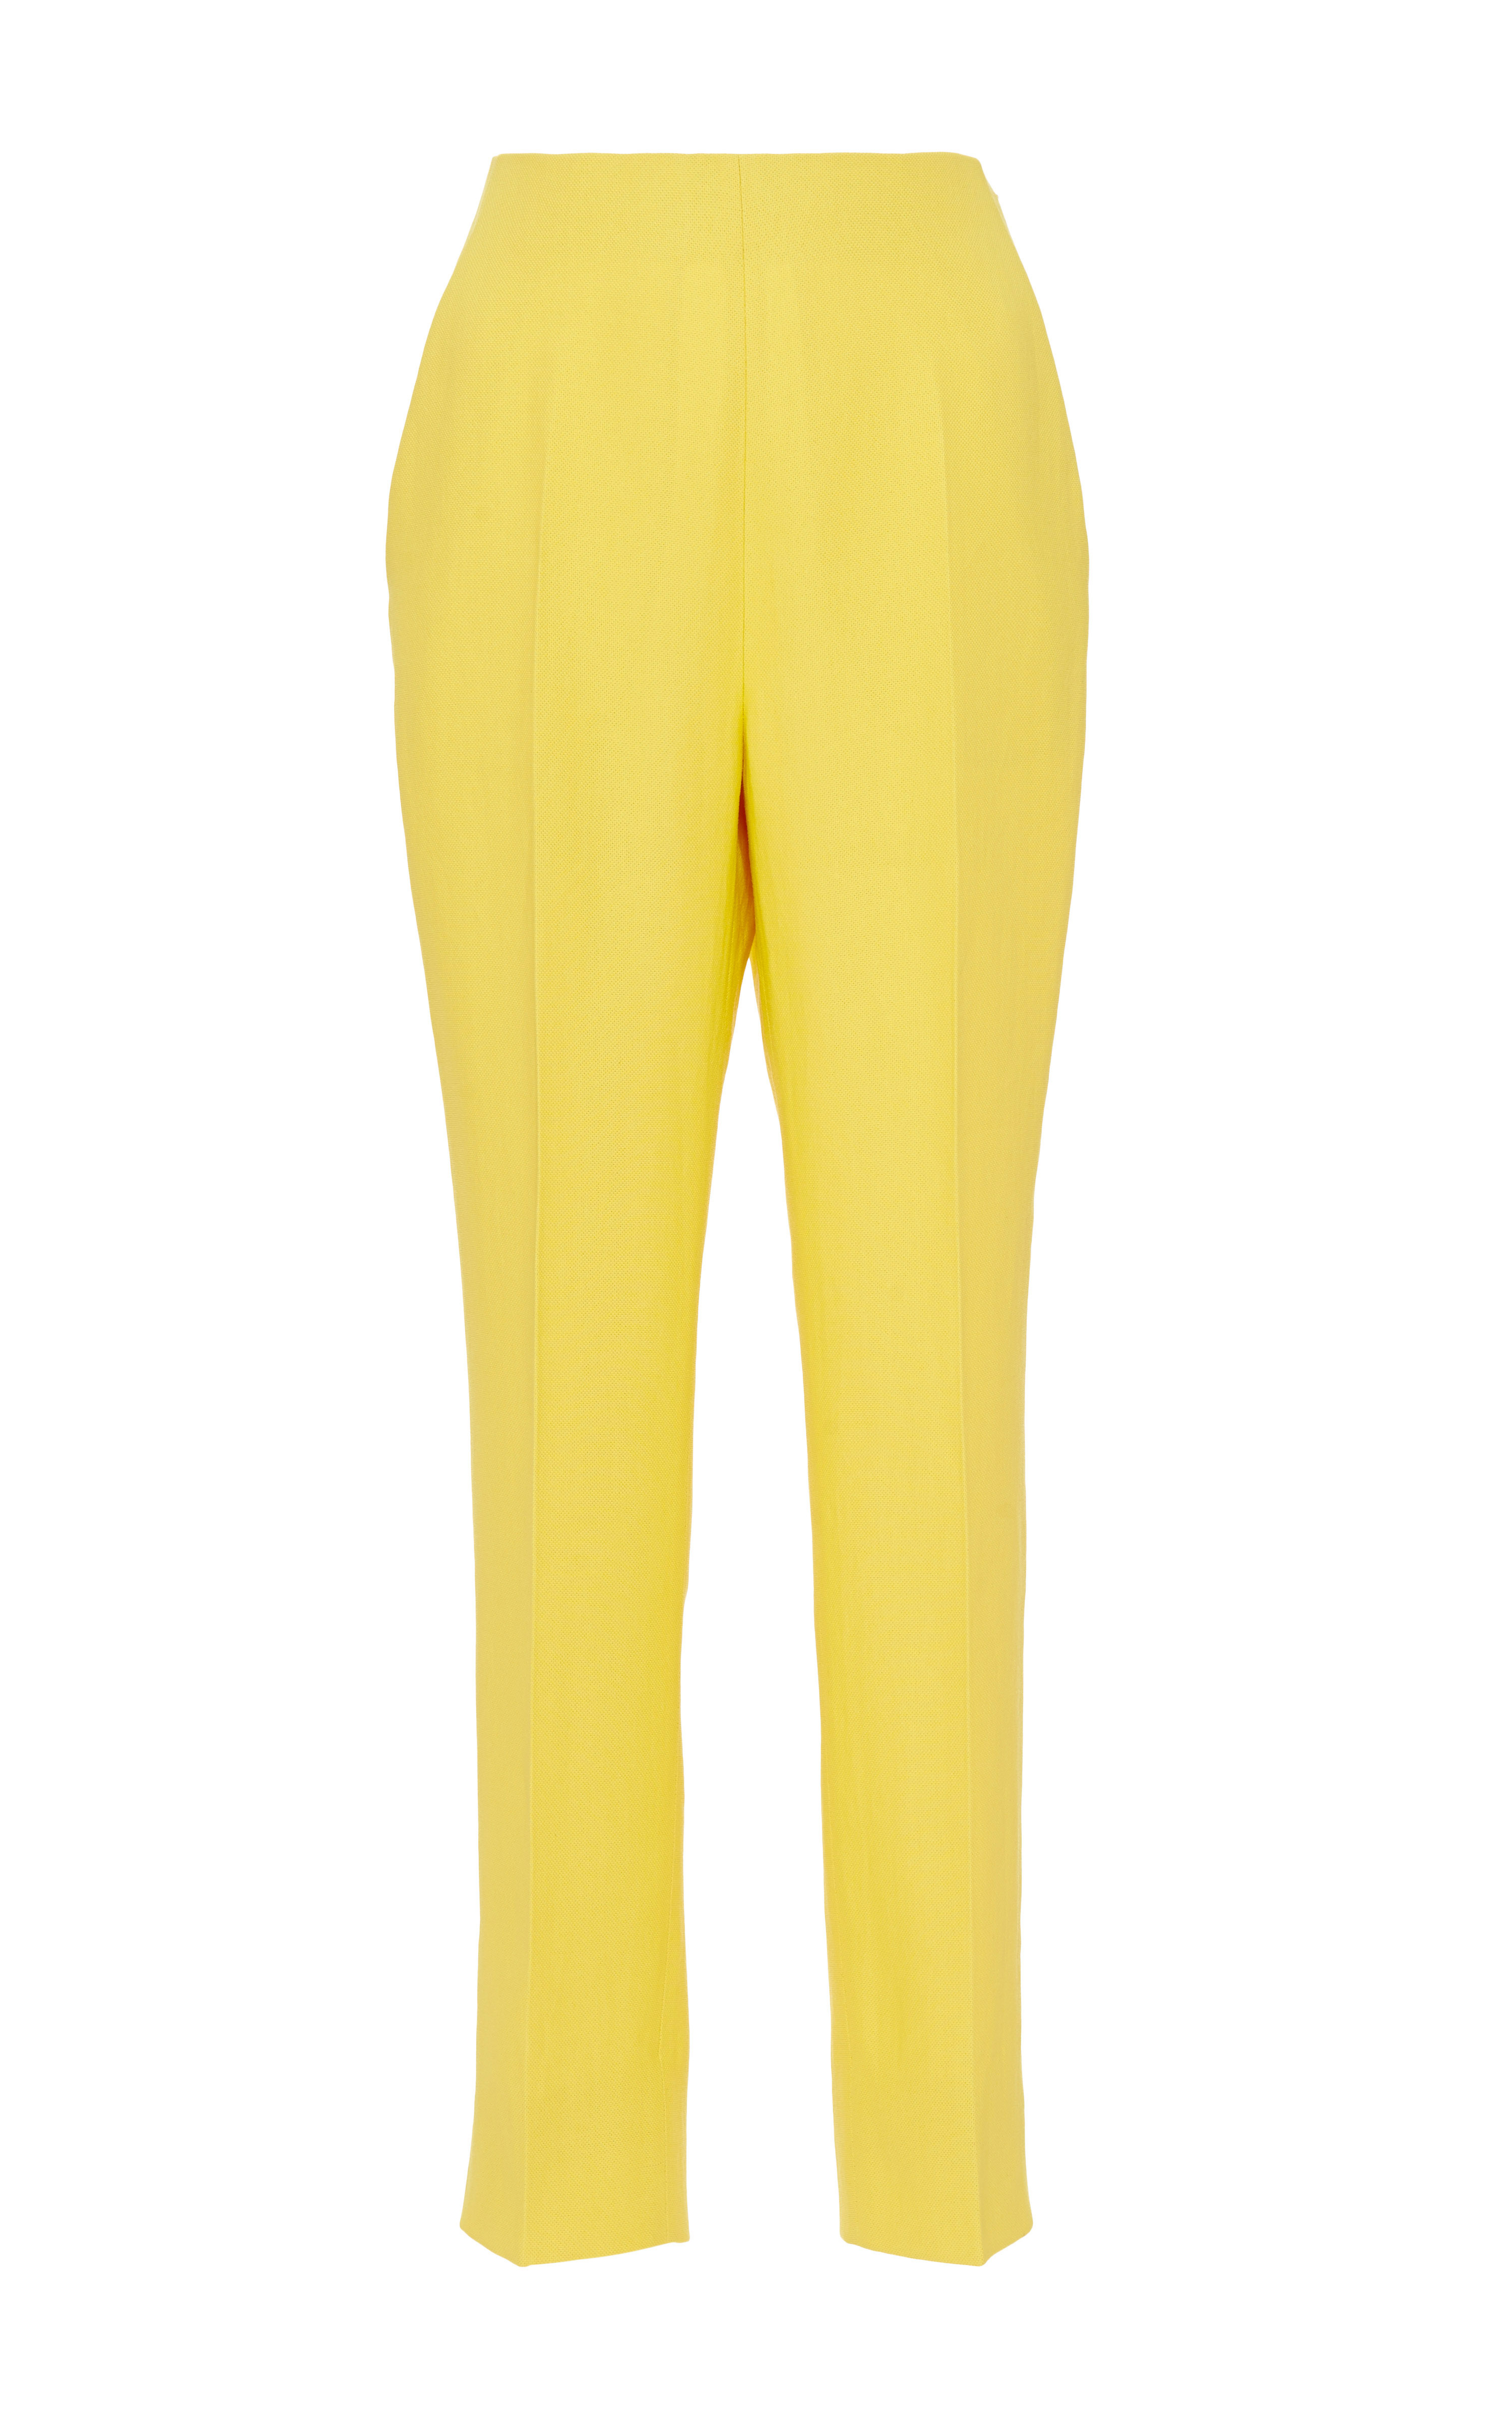 Delpozo Lemon Yellow Double Paper Twill Tapered Pant in Yellow | Lyst